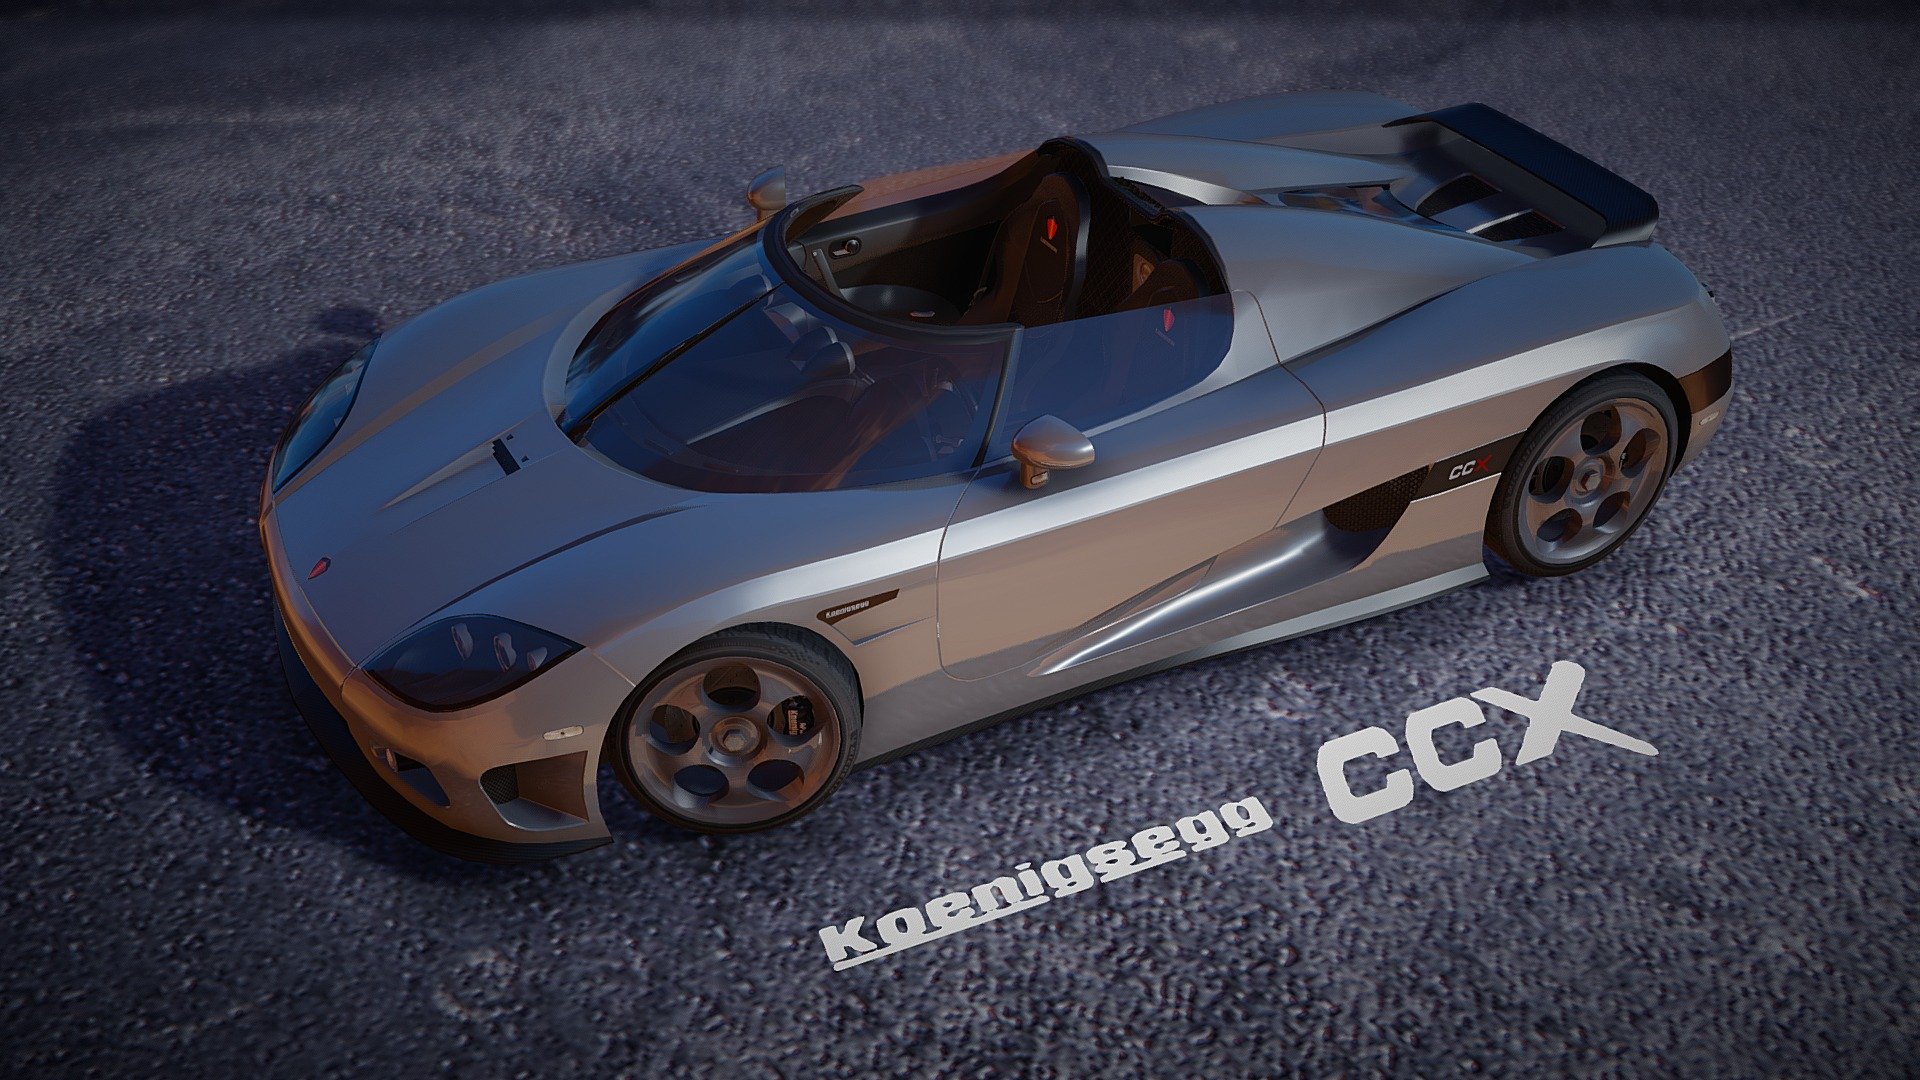 Here's my midpoly model of the koenigsegg CCX. This time I wanted to focus on more details and textures and l'm quite pleased with how it turned out.




Modelled in Blender

Textures made in Photoshop

Hope you like it! - 2007 Koenigsegg CCX (No Roof) - Download Free 3D model by _s0h1o9b (@s0h1o9b) 3d model